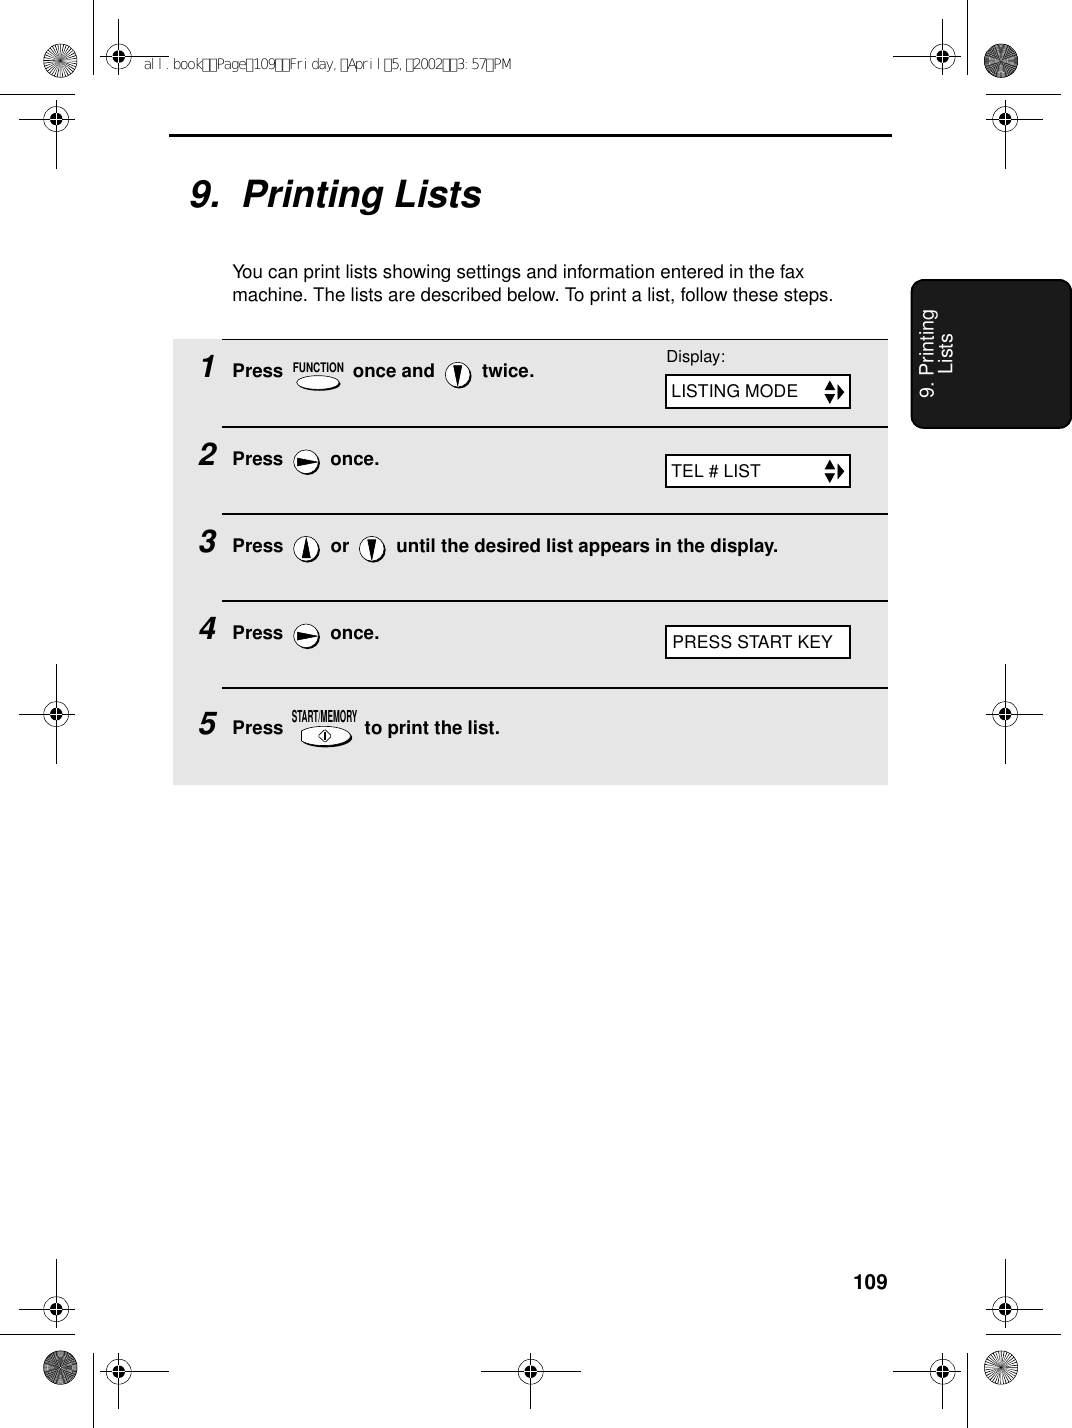 1099. Printing Lists9.  Printing ListsYou can print lists showing settings and information entered in the fax machine. The lists are described below. To print a list, follow these steps.1Press   once and   twice.2Press  once.3Press   or   until the desired list appears in the display.4Press  once.5Press   to print the list.FUNCTIONSTART/MEMORYDisplay:LISTING MODETEL # LISTPRESS START KEYall.bookPage109Friday,April5,20023:57PM